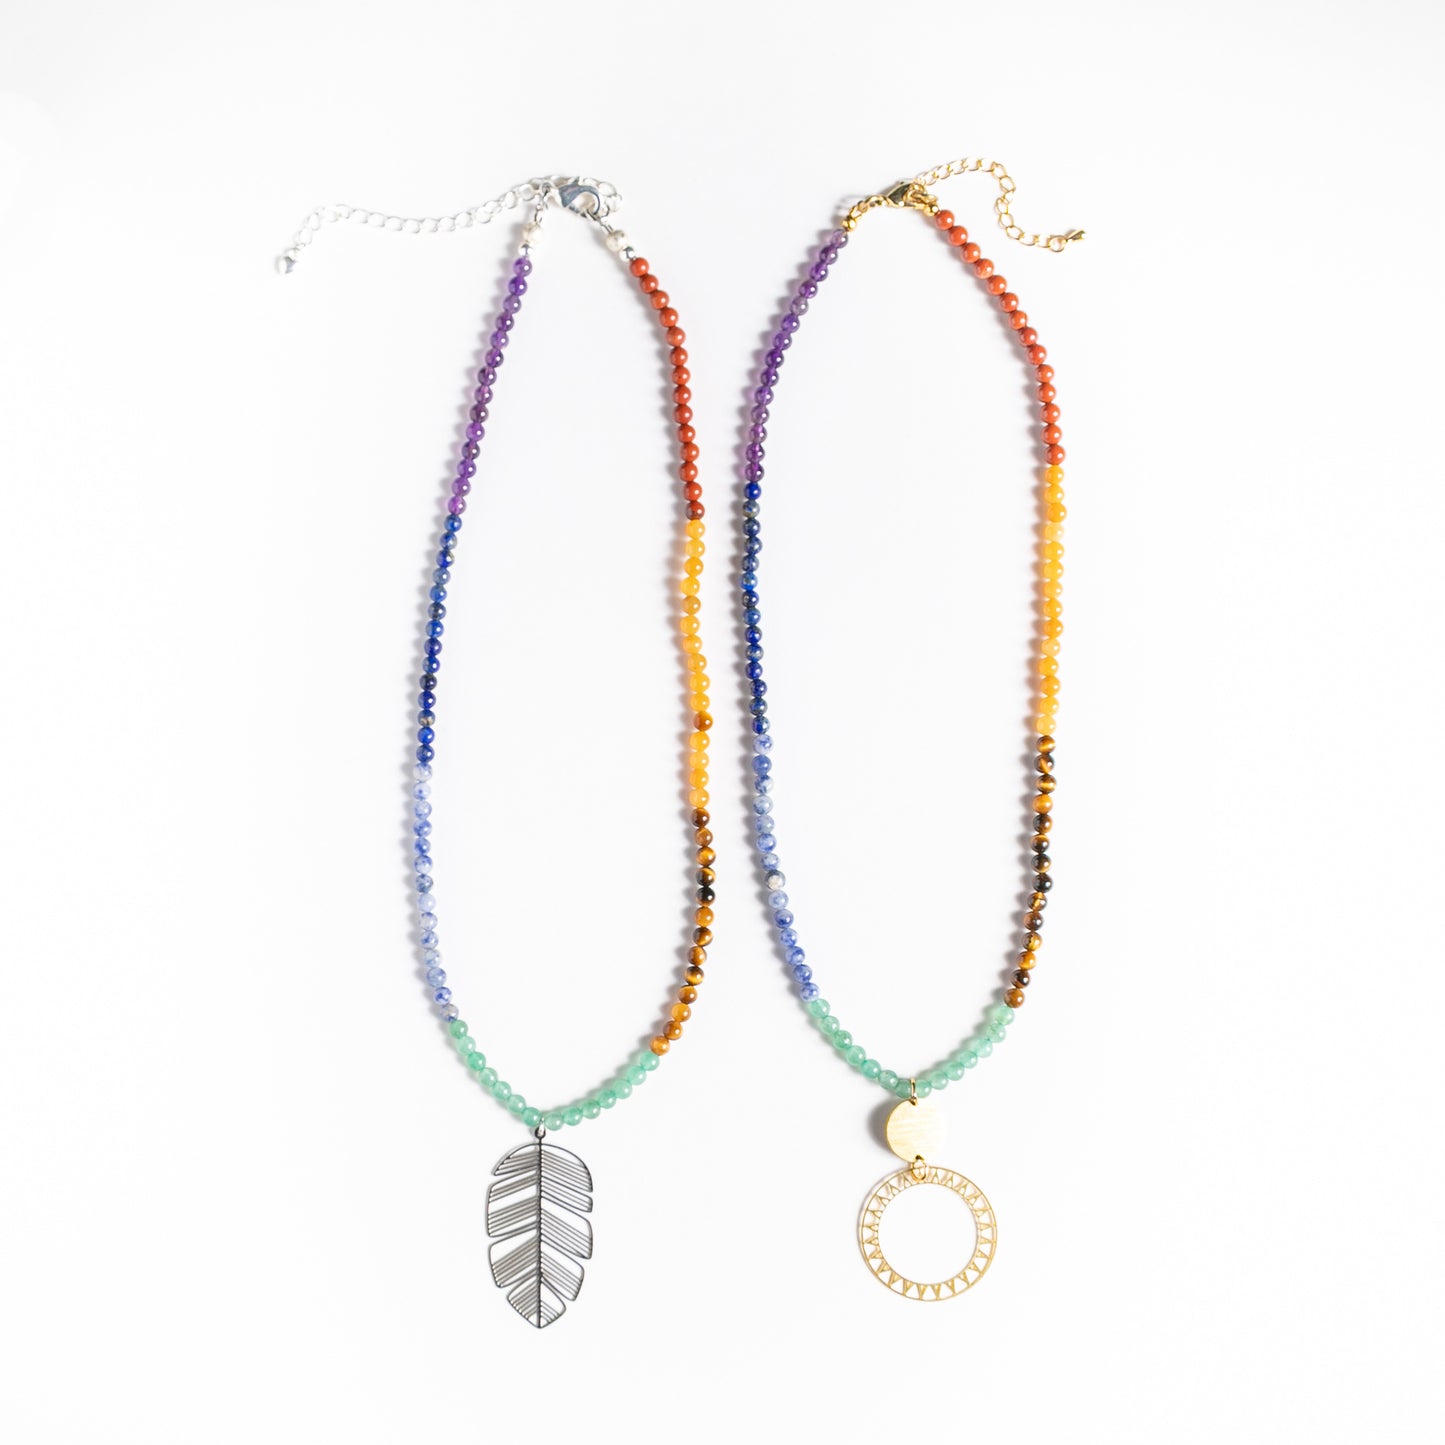 Chakra Beads Necklace with Nature Pendant